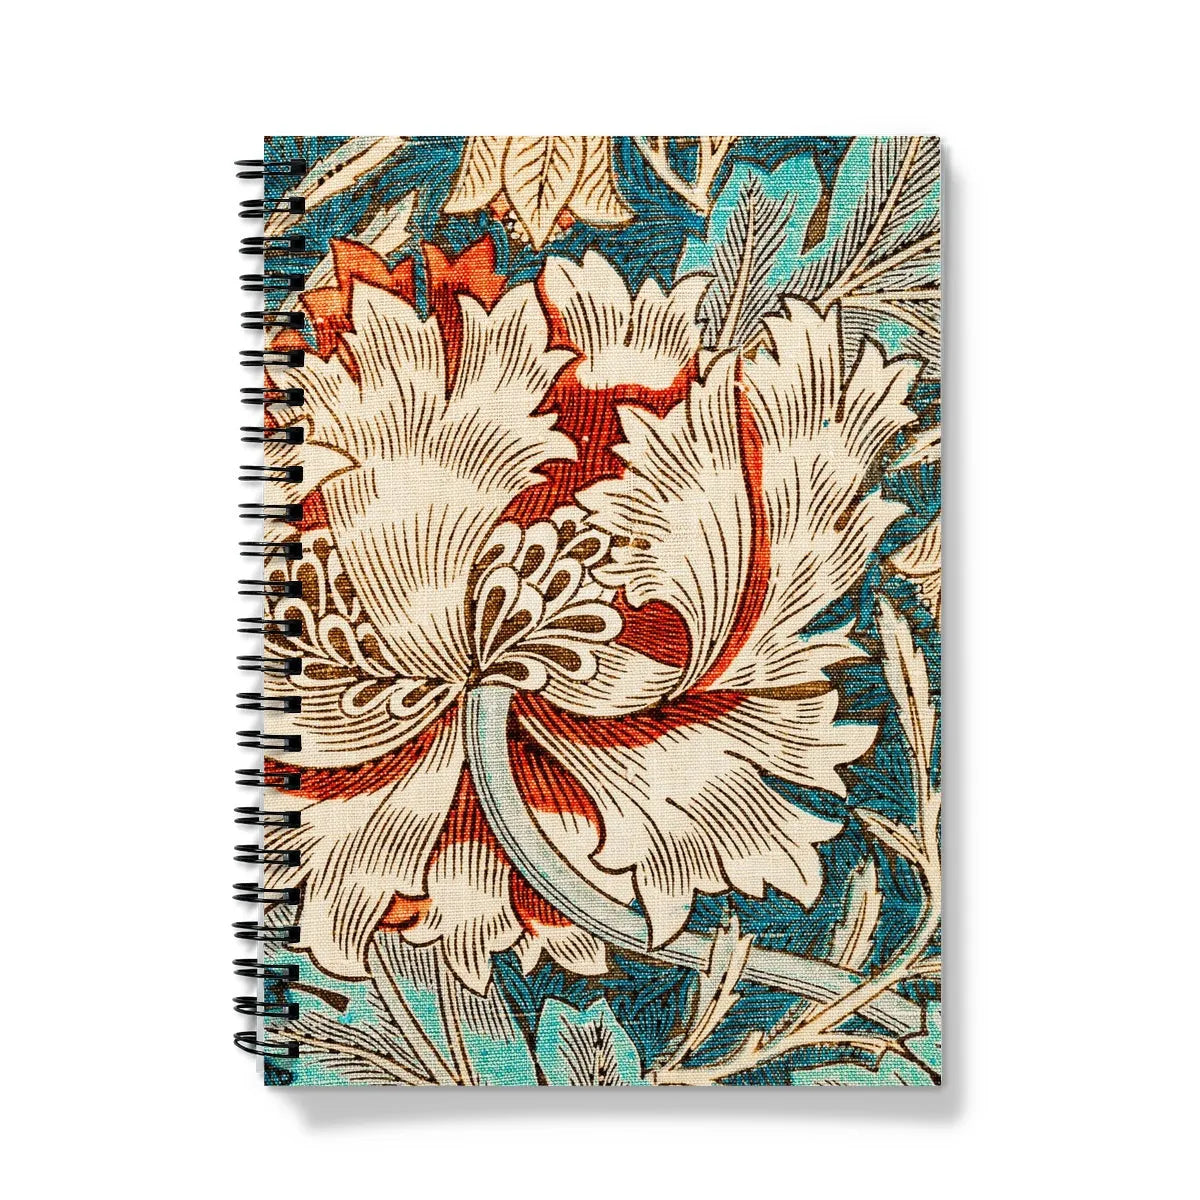 Honeysuckle Too - William Morris Arts And Crafts Notebook - A5 - Graph Paper - Notebooks & Notepads - Aesthetic Art